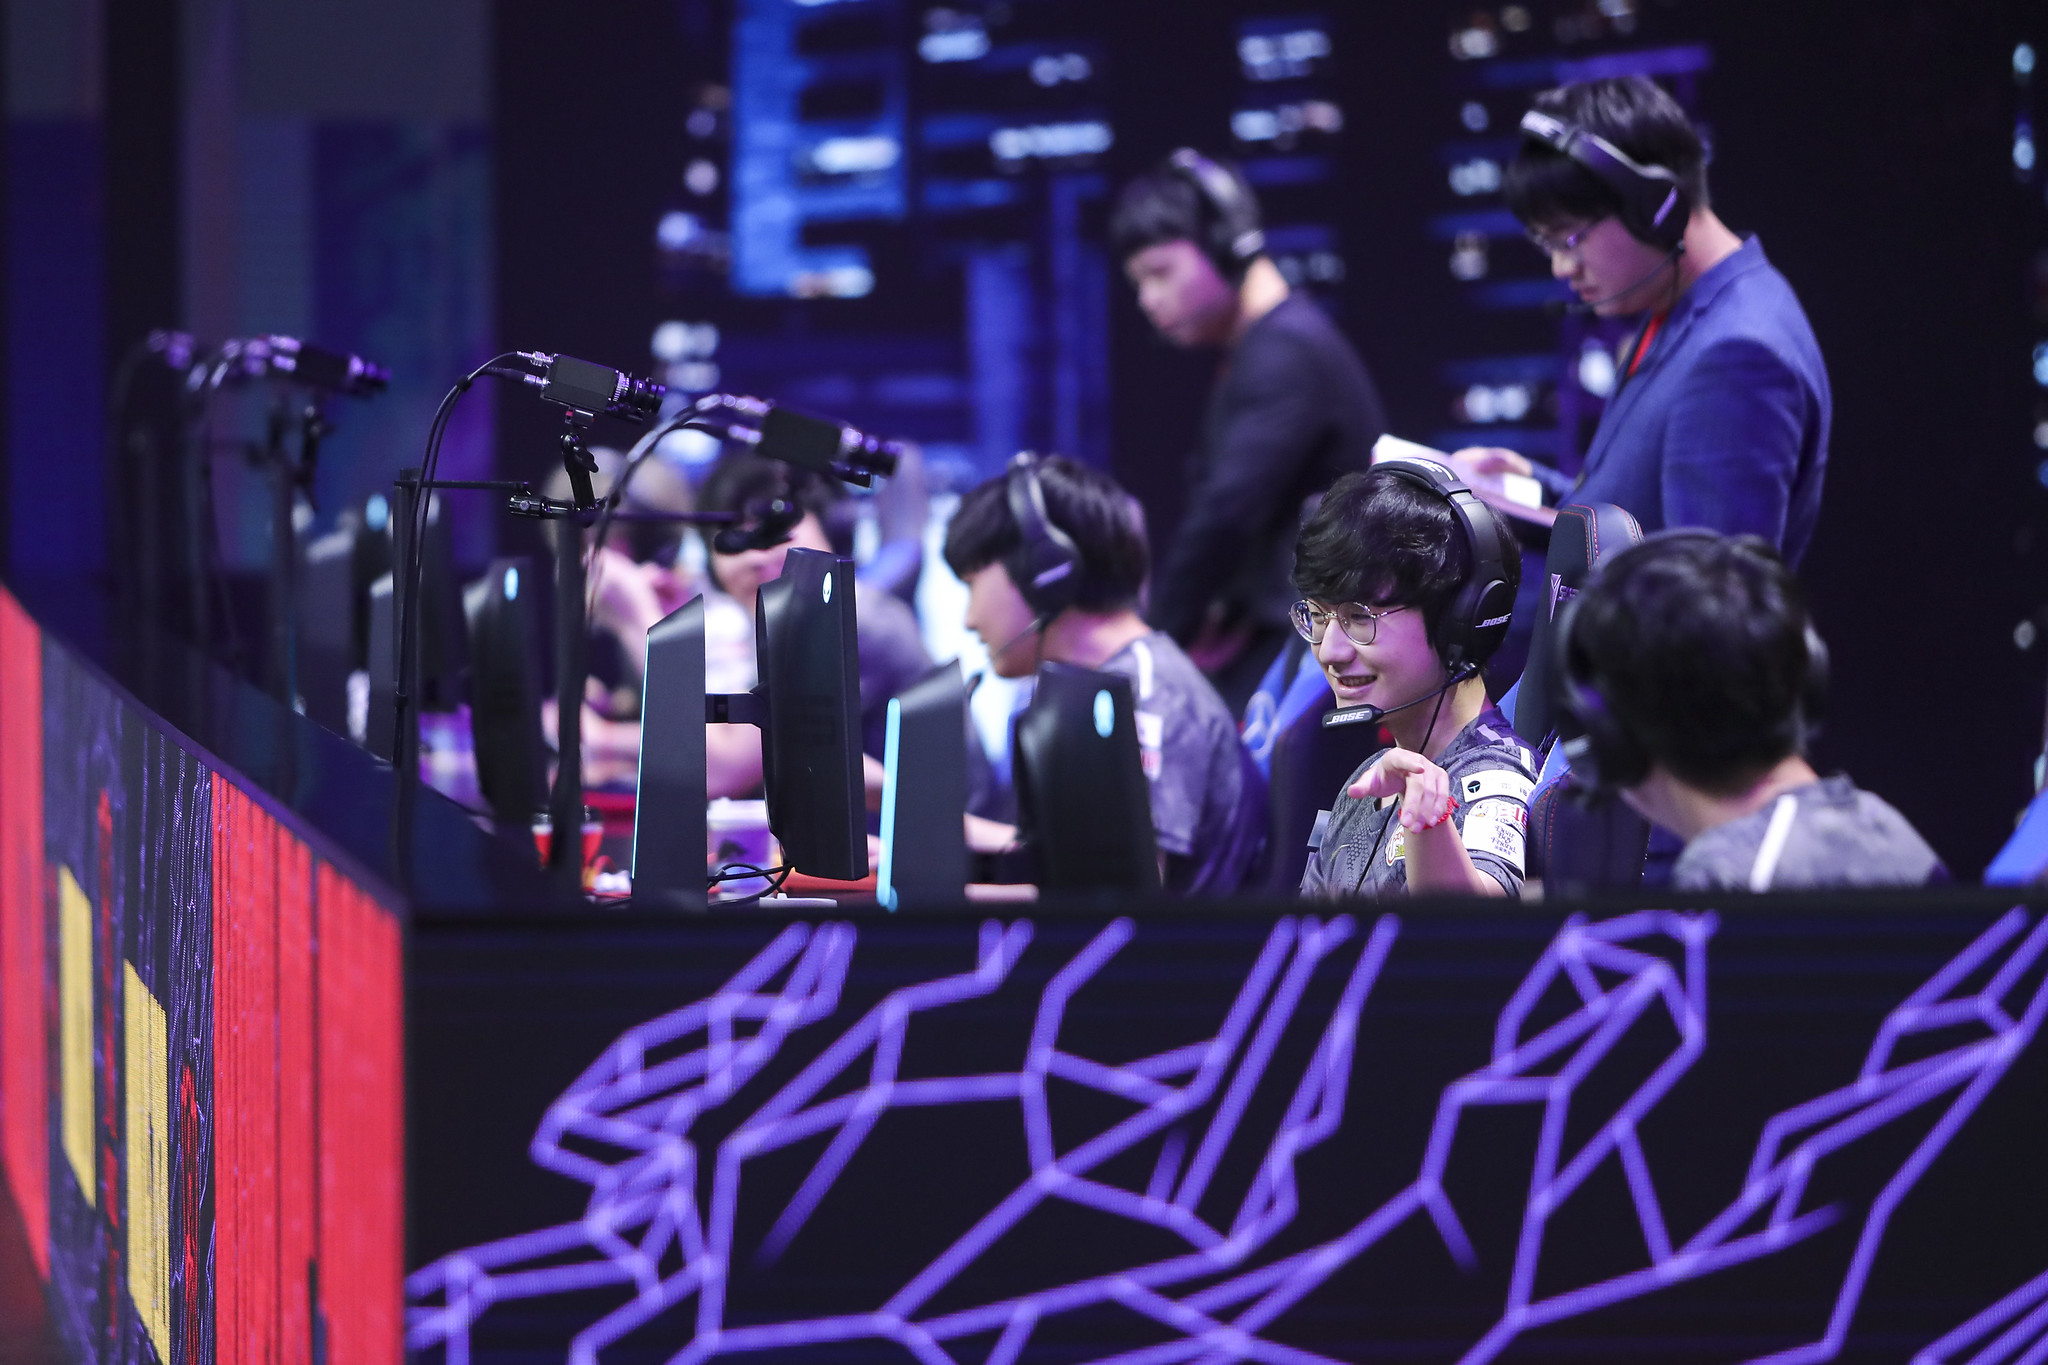 League Of Legends World Championship 2020 Main Group Event Day Two: LGD Gaming Vs Fnatic